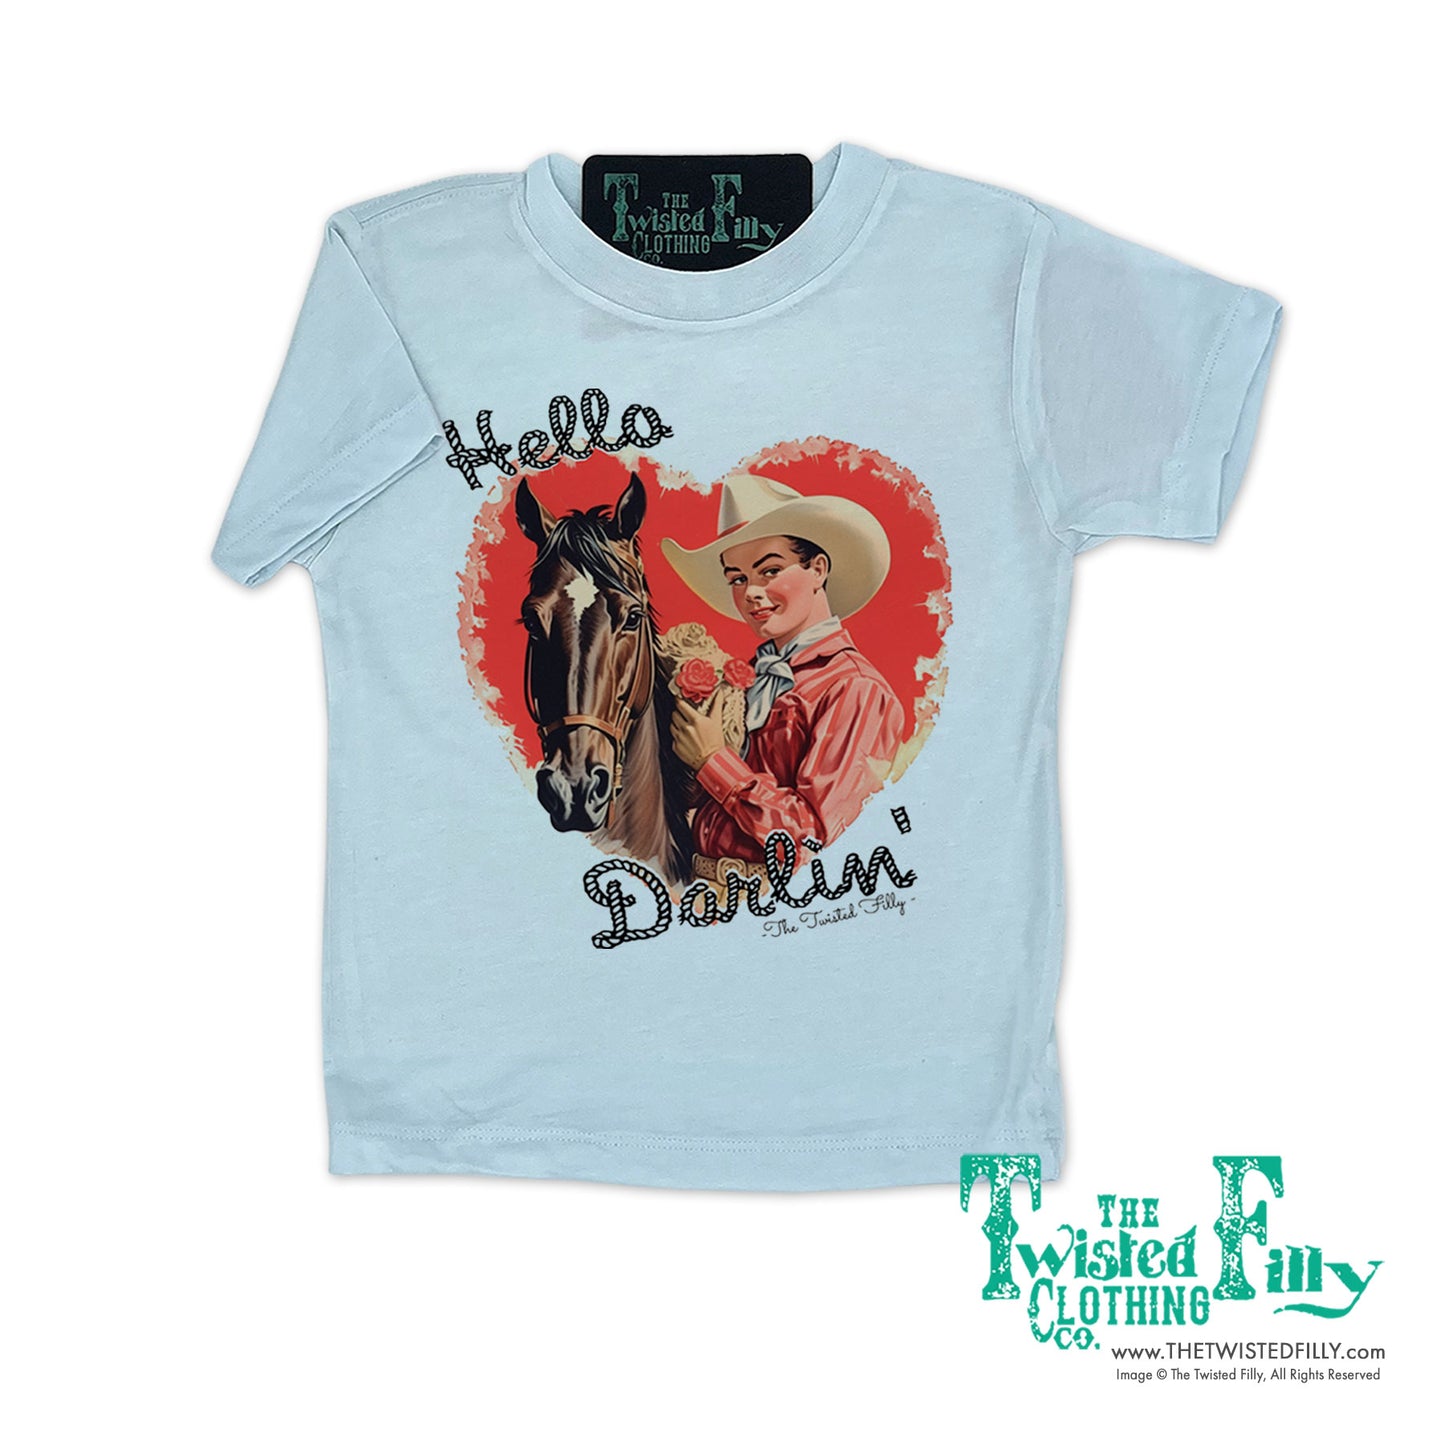 Hello Darlin' - S/S Youth Tee - Assorted Colors